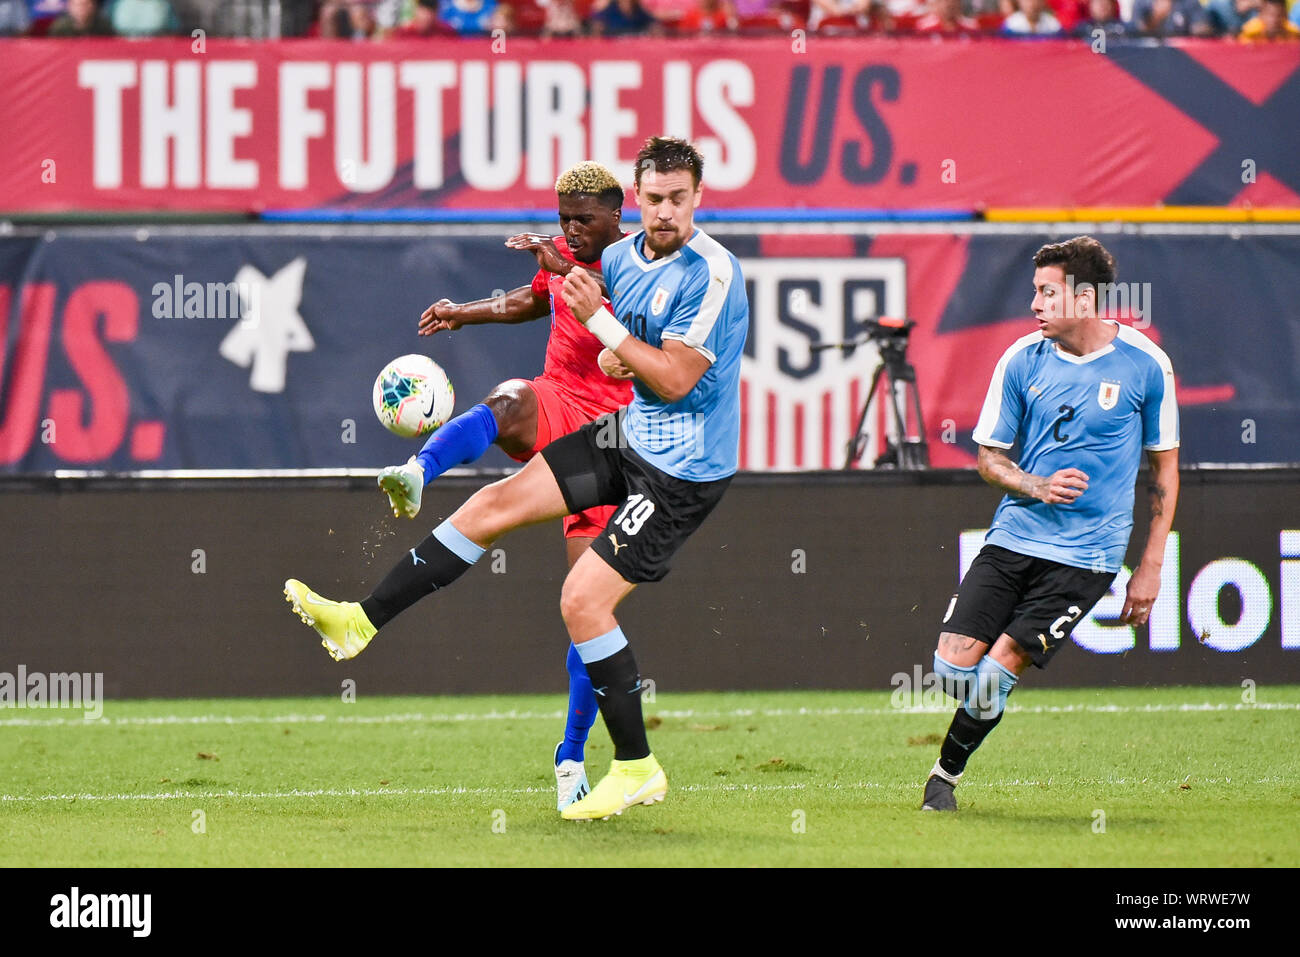 St. Louis, Missouri, USA. 10th Sep, 2019. Uruguay defender Sebastian Coates (19) flinches to avoid being hit by the crossing pass of US Men's National Team forward Gyasi Zardes (9) during the final match before the Concacaf Nations League as the United States Men's National Team hosted Uruguay at Busch Stadium in St. Louis City, MO Ulreich/CSM/Alamy Live News Stock Photo